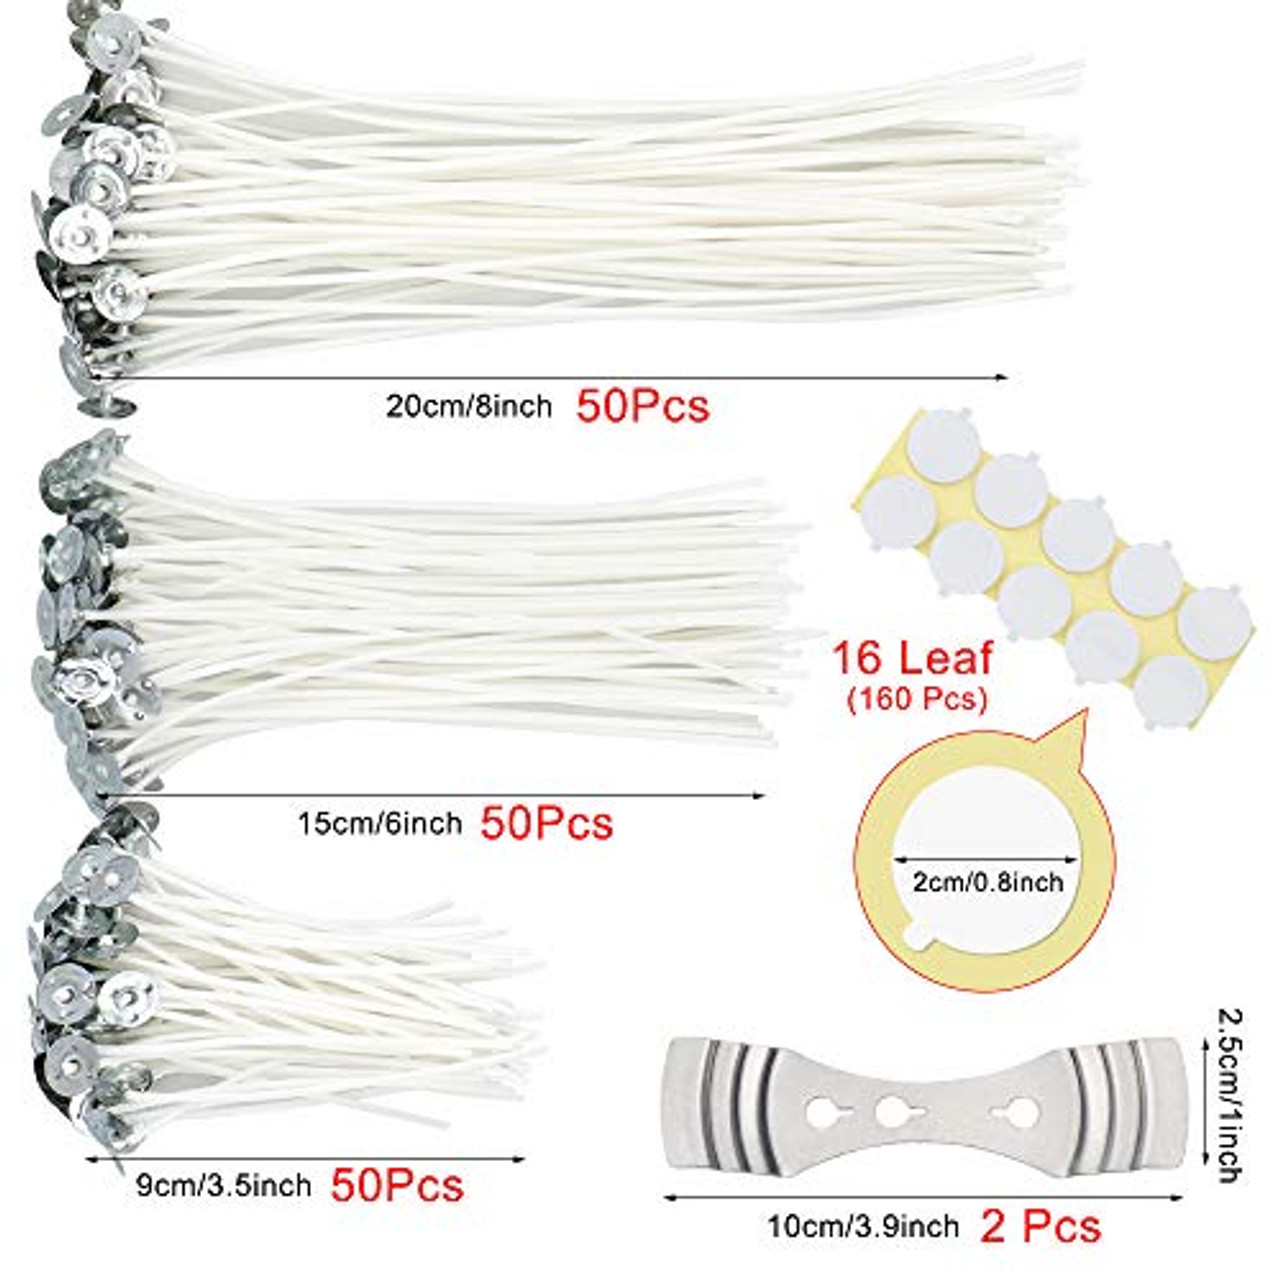 100pcs Eco 16 Wicks for Soy Candles, 6 inch Eco Pretabbed Candle Wicks for Candle Making,CD 22 Thick Candle Wick with Base